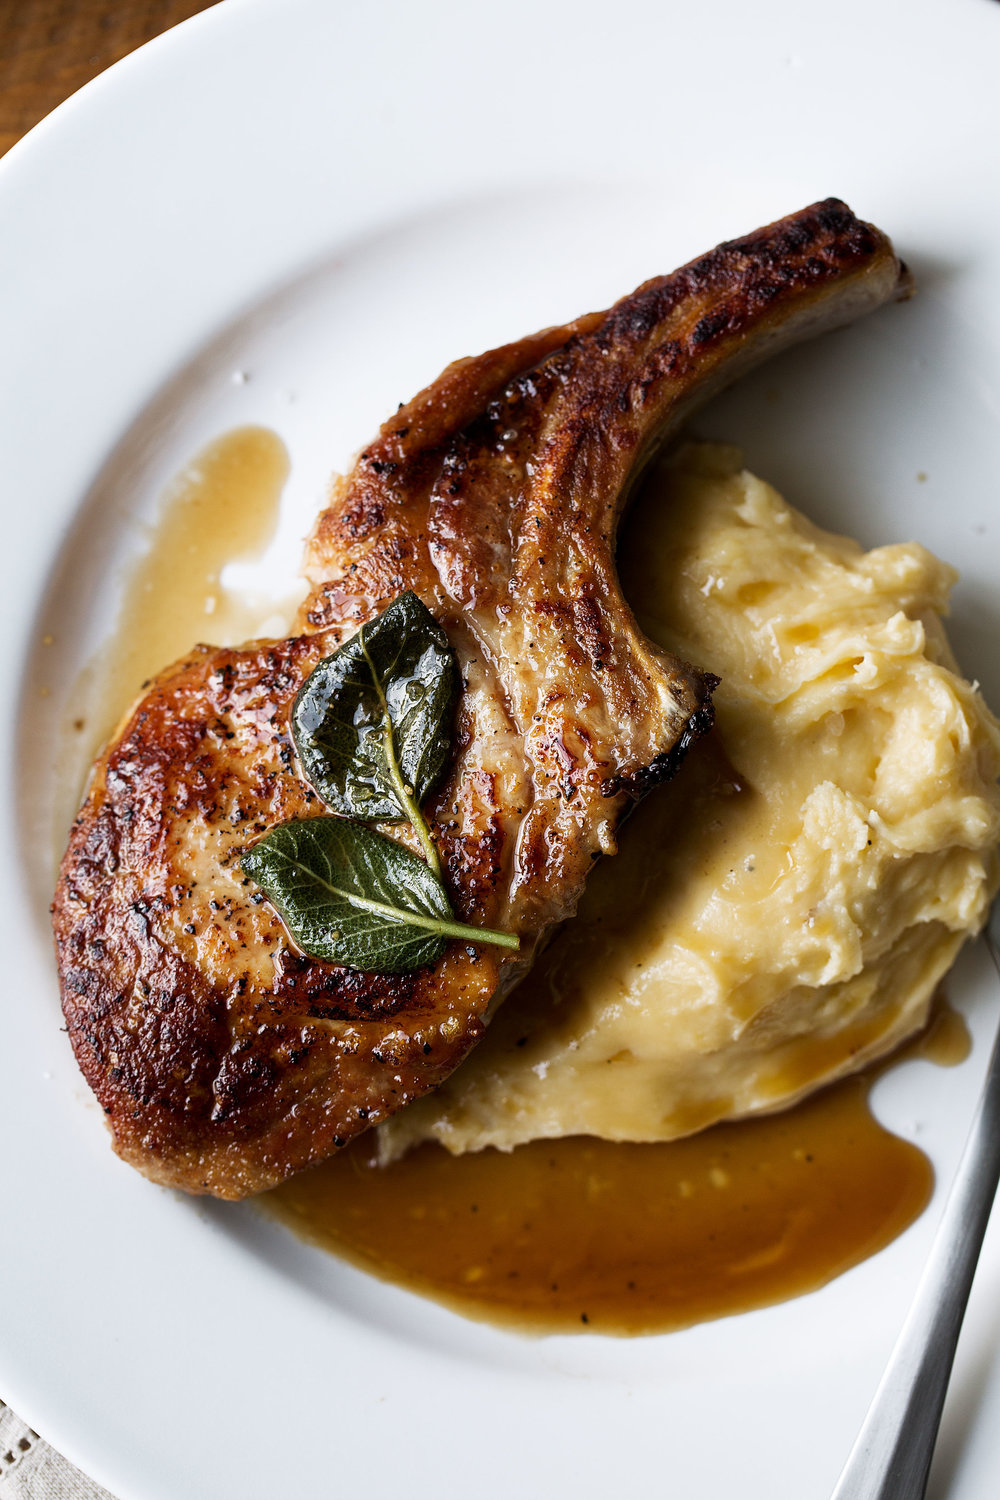 apple cider and sage glazed pork chops with whipped cheddar potatoes